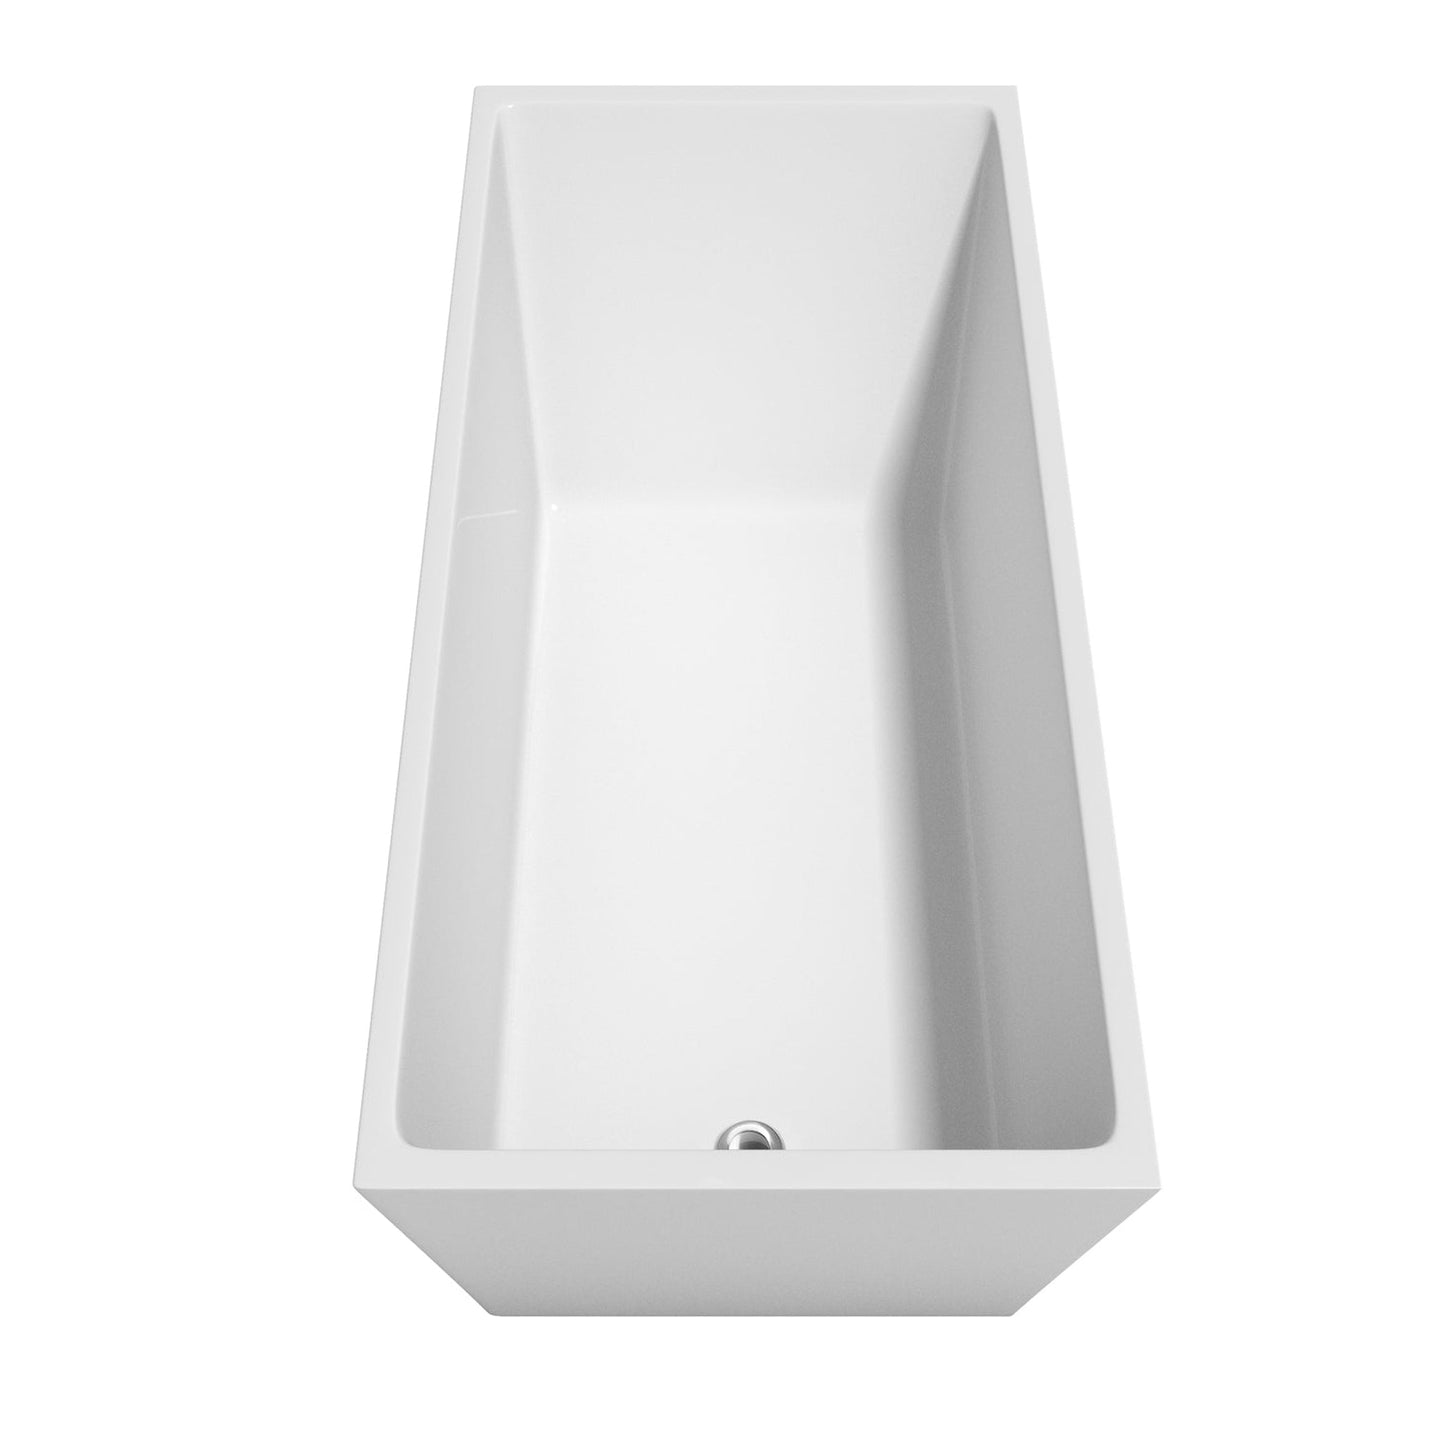 Wyndham Collection Hannah 67" Freestanding Bathtub in White With Polished Chrome Drain and Overflow Trim